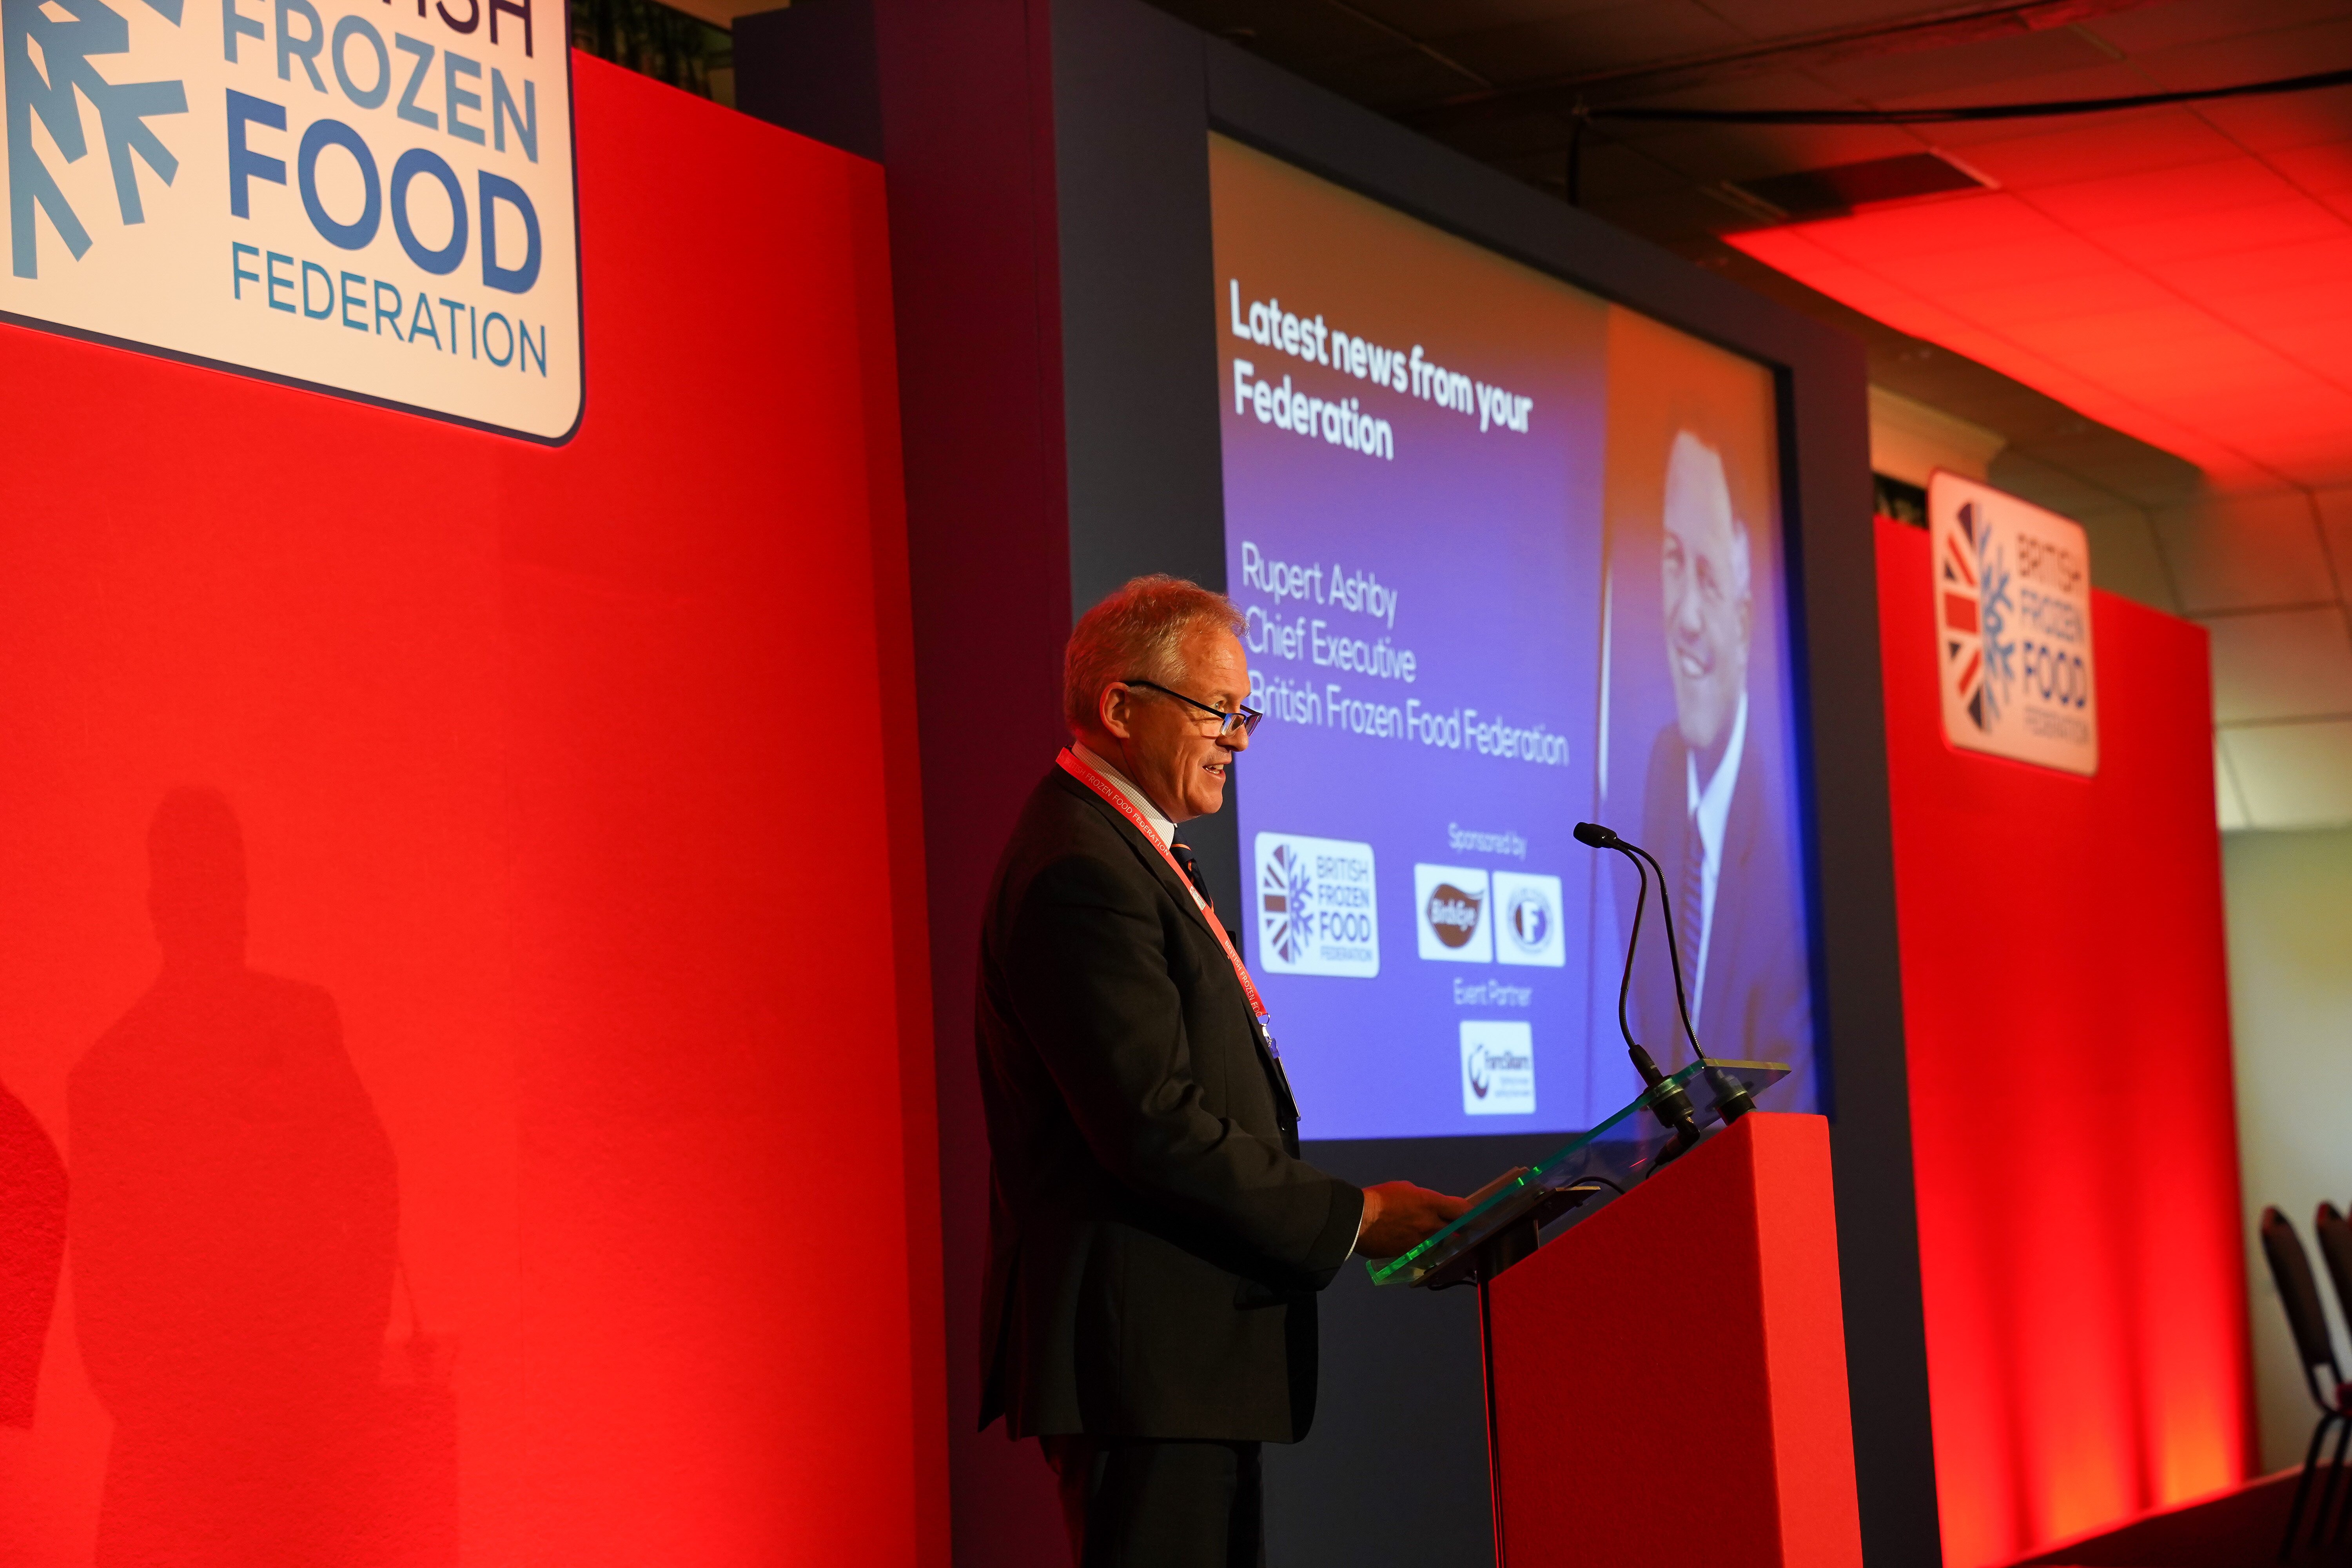 Challenges and opportunities highlighted at frozen food conference